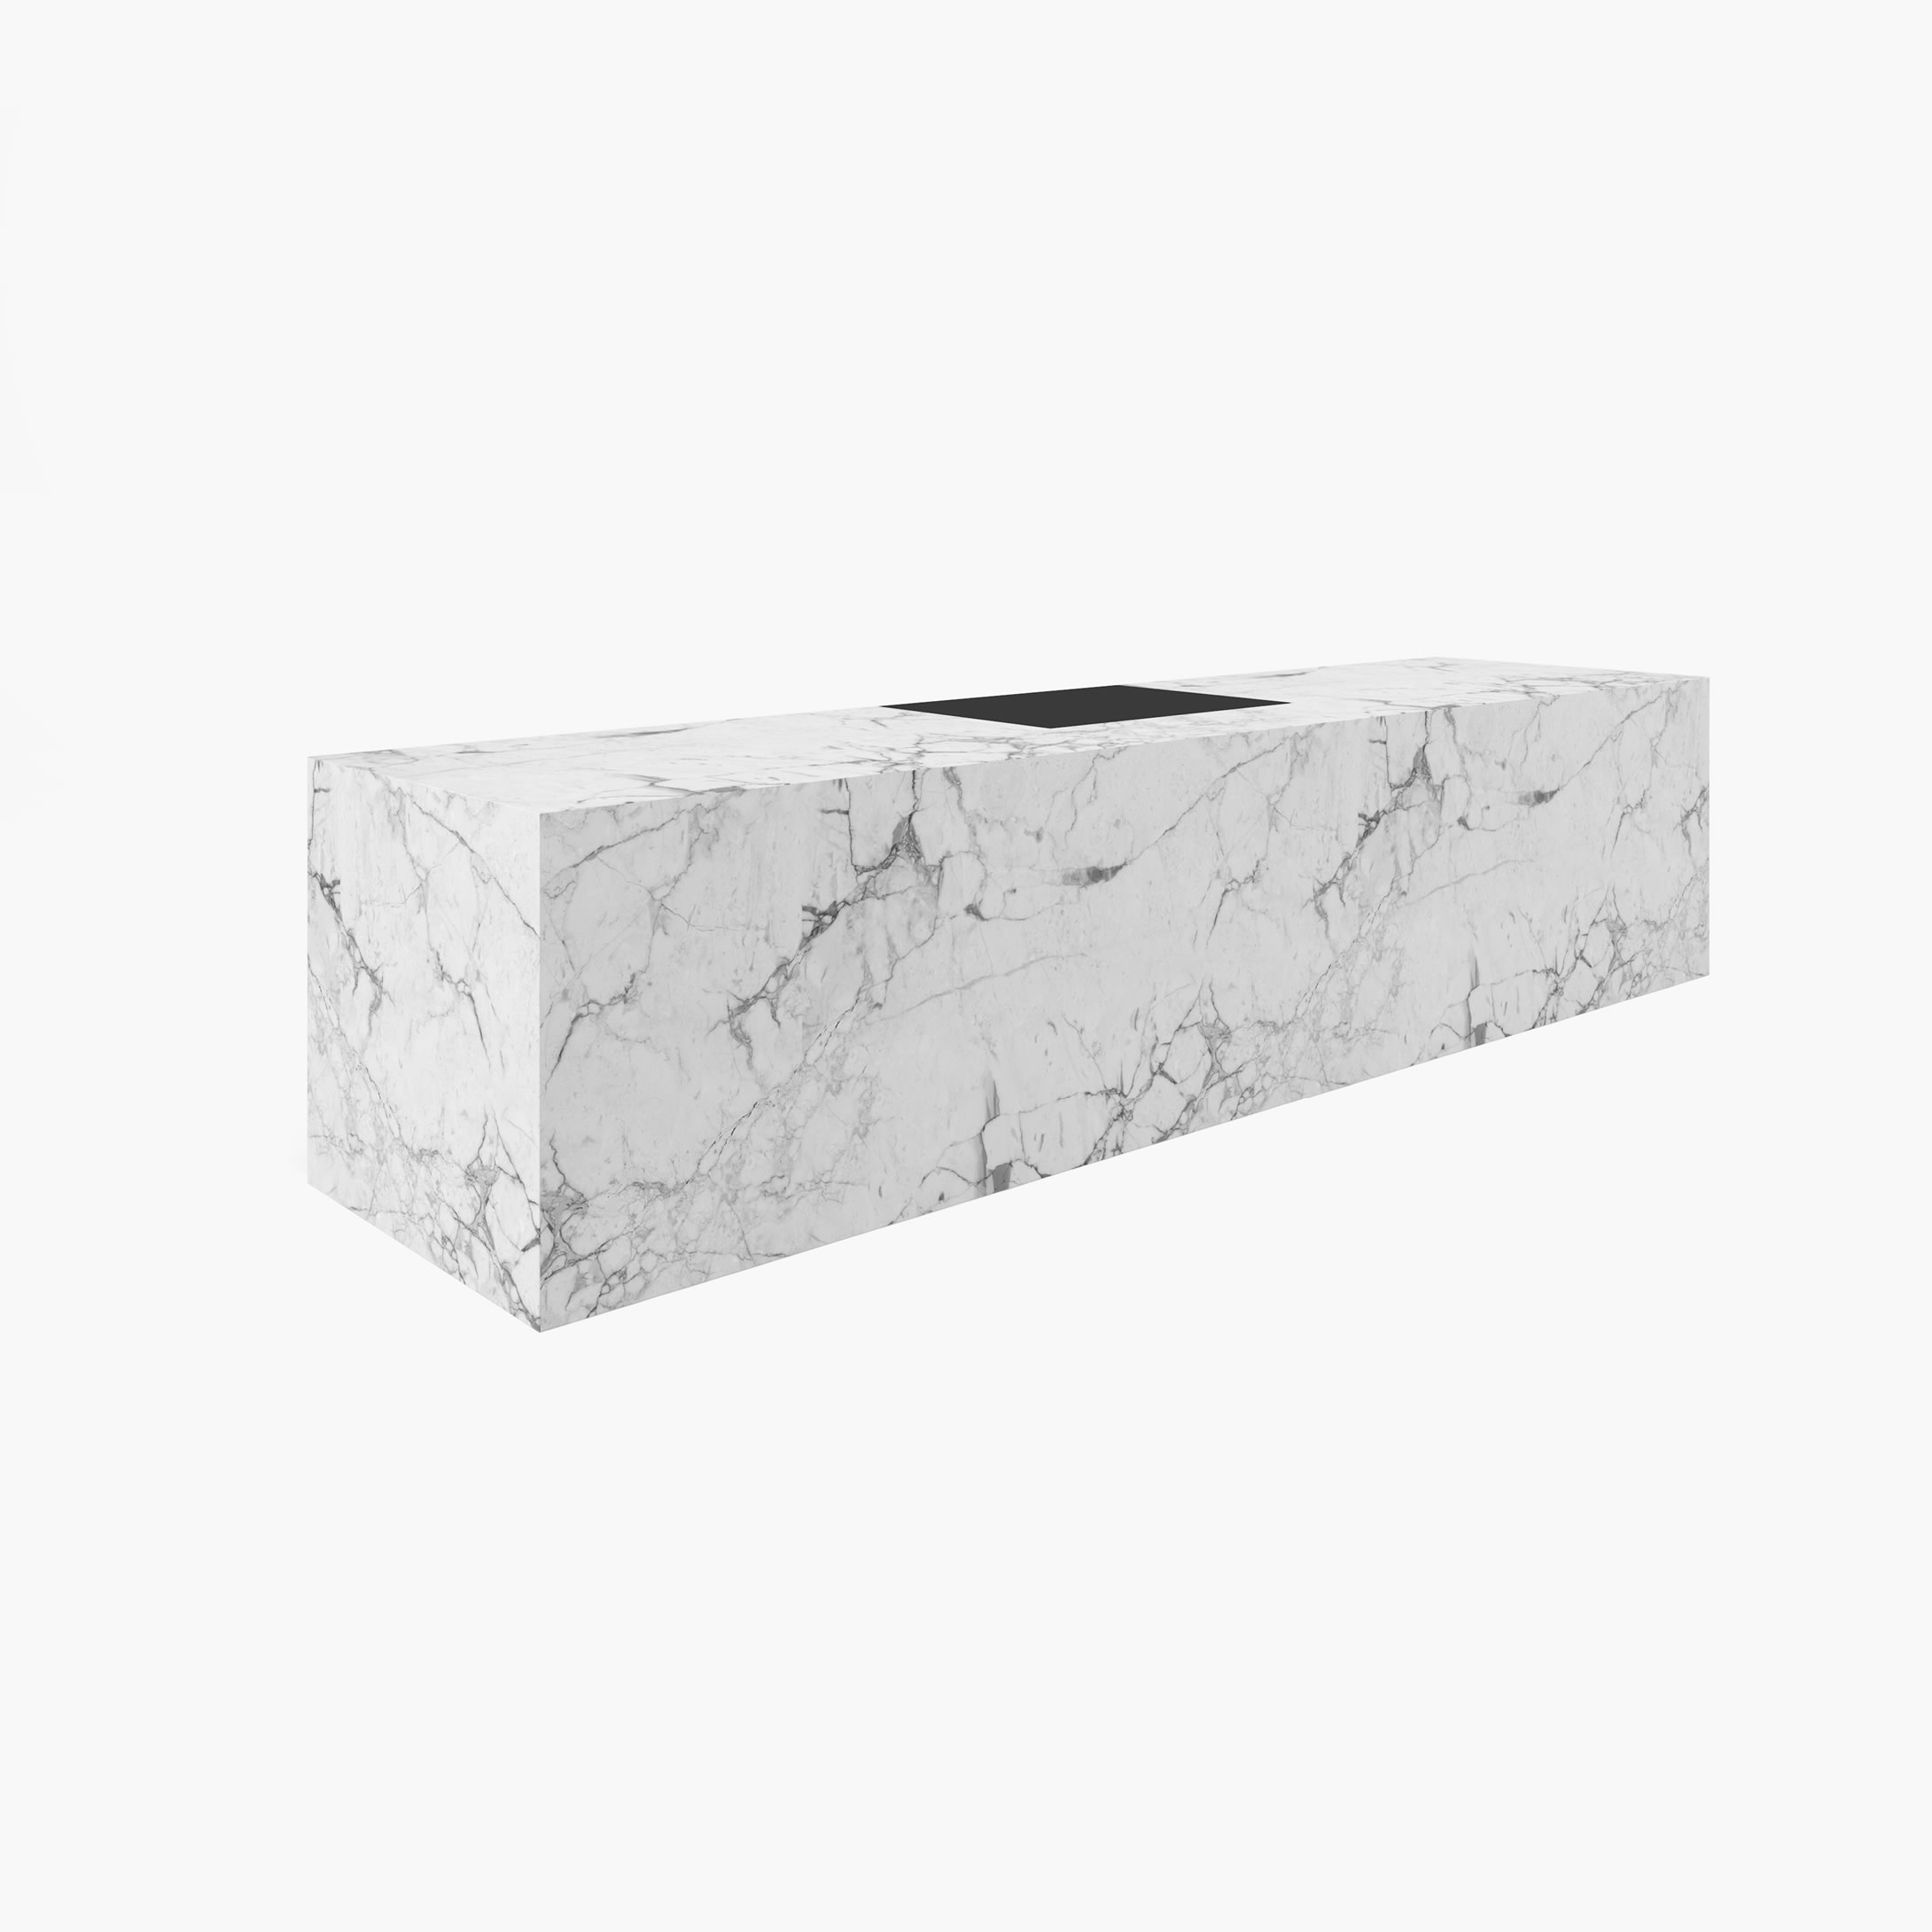 Desk large with extensible writing pad White Arabescato Marble artistic executive office art works Desks FS 417 FELIX SCHWAKE